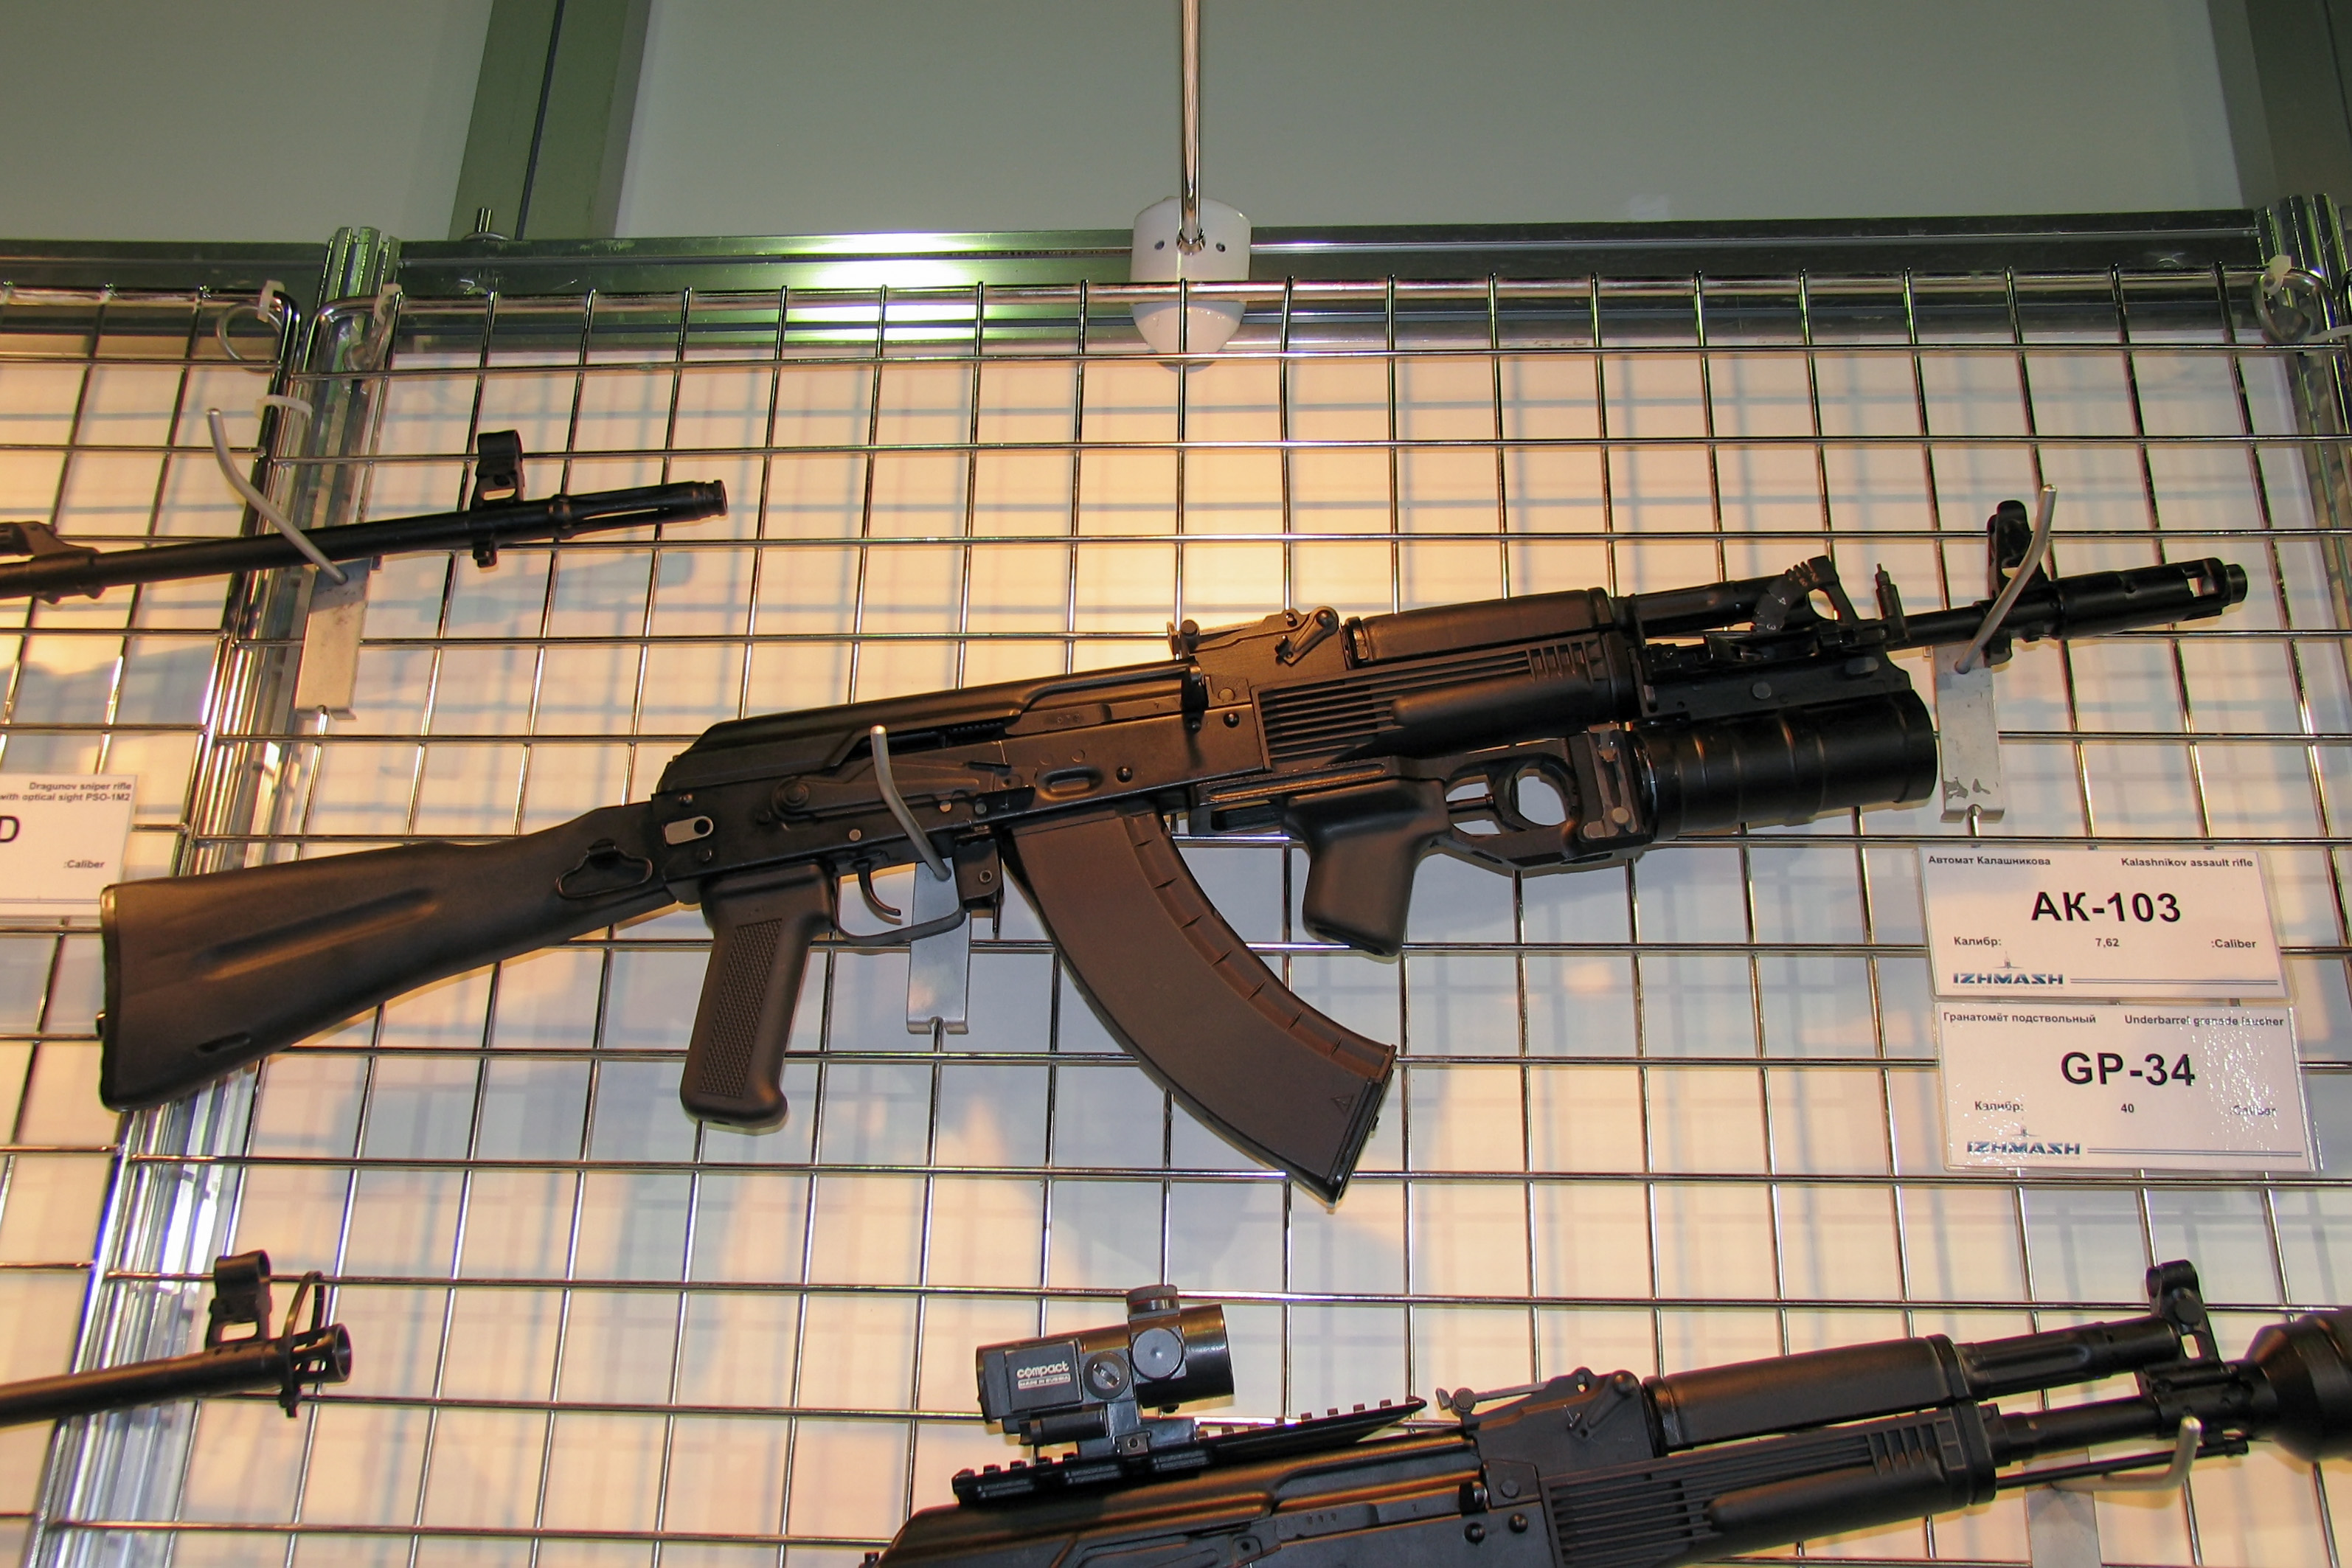 File Ak 103 Assault Rifle With Gp 34 Grenade Launcher At Engineering Technologies 12 Jpg Wikimedia Commons